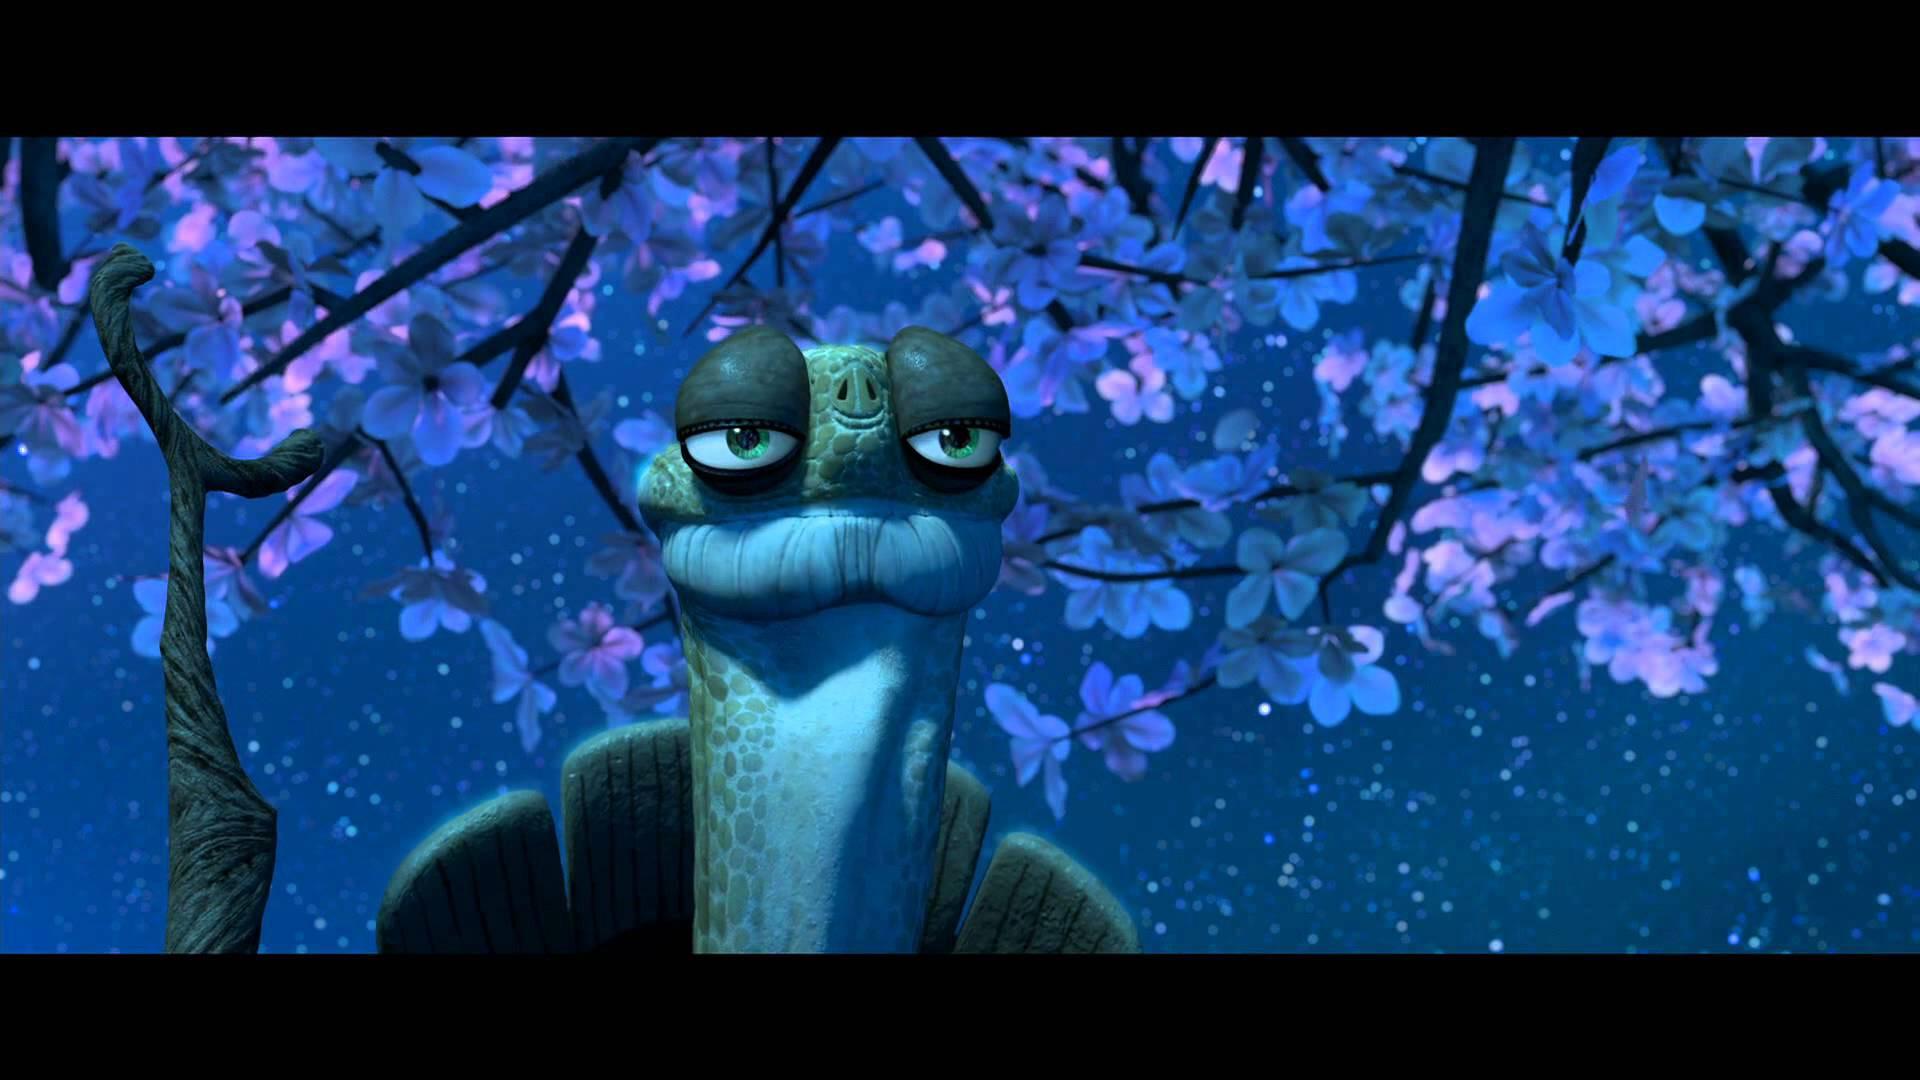 The Return Of Master Oogway.